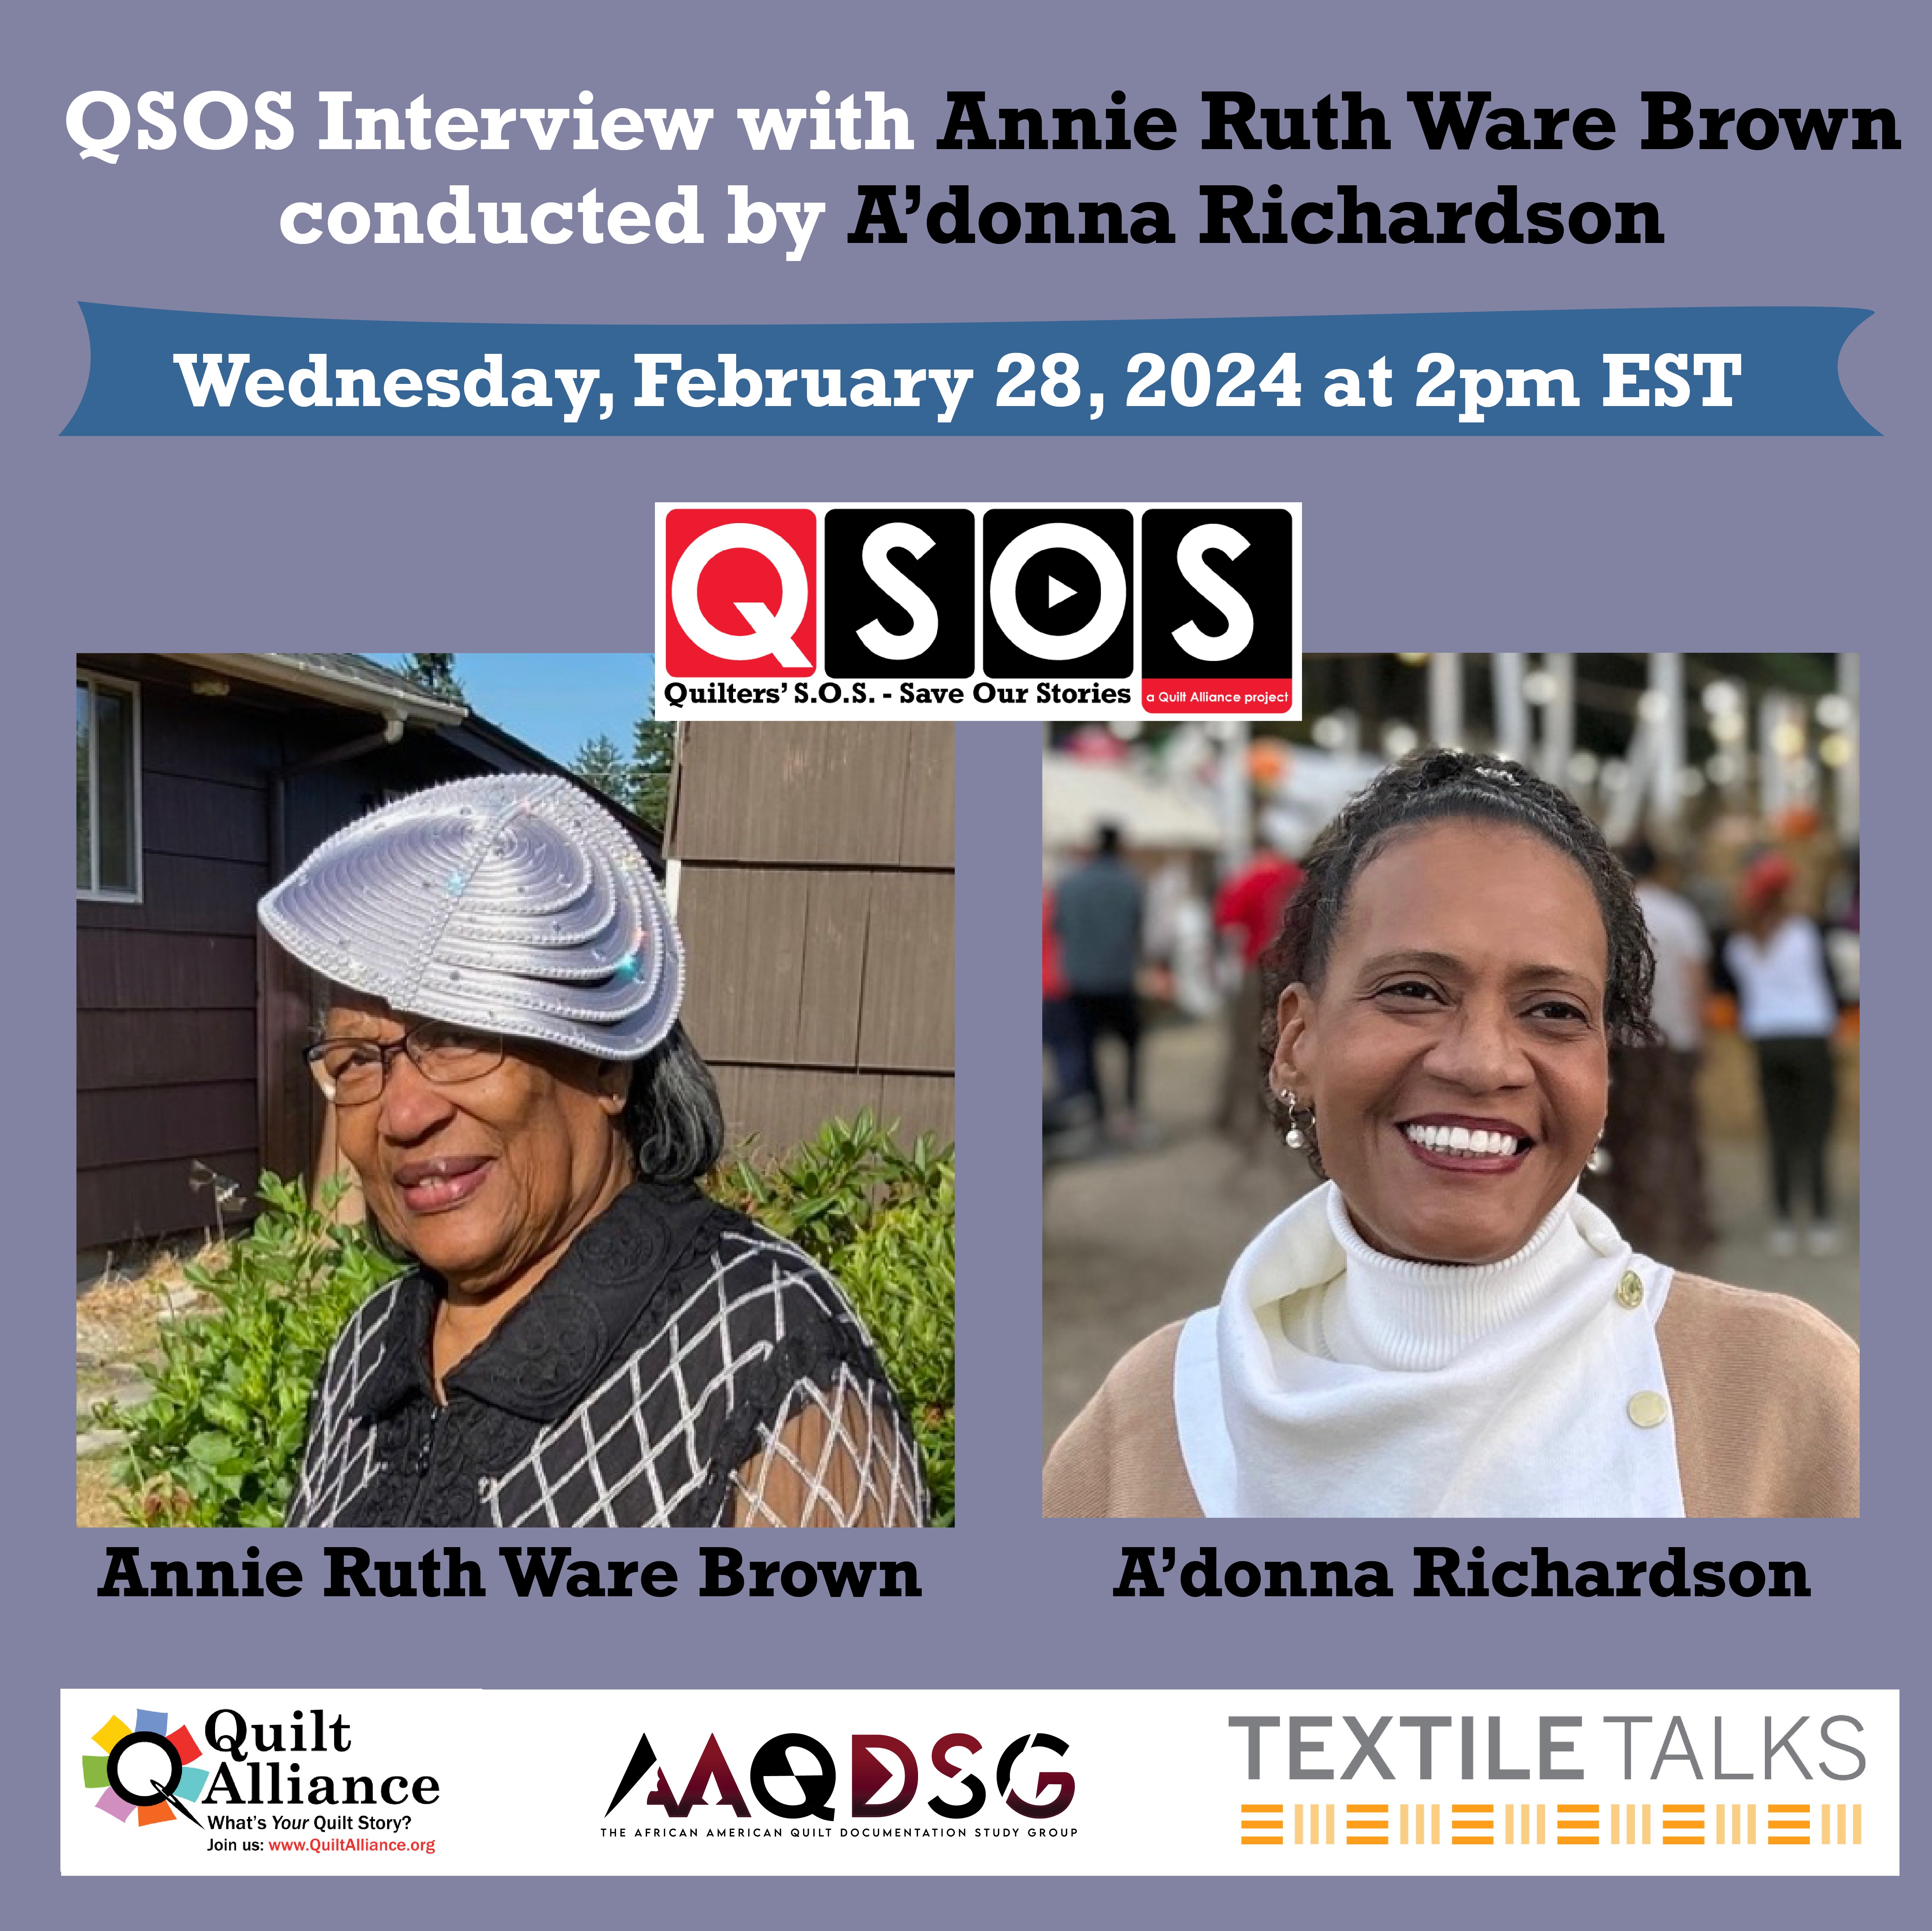 QSOS with Annie Ruth Ware Brown